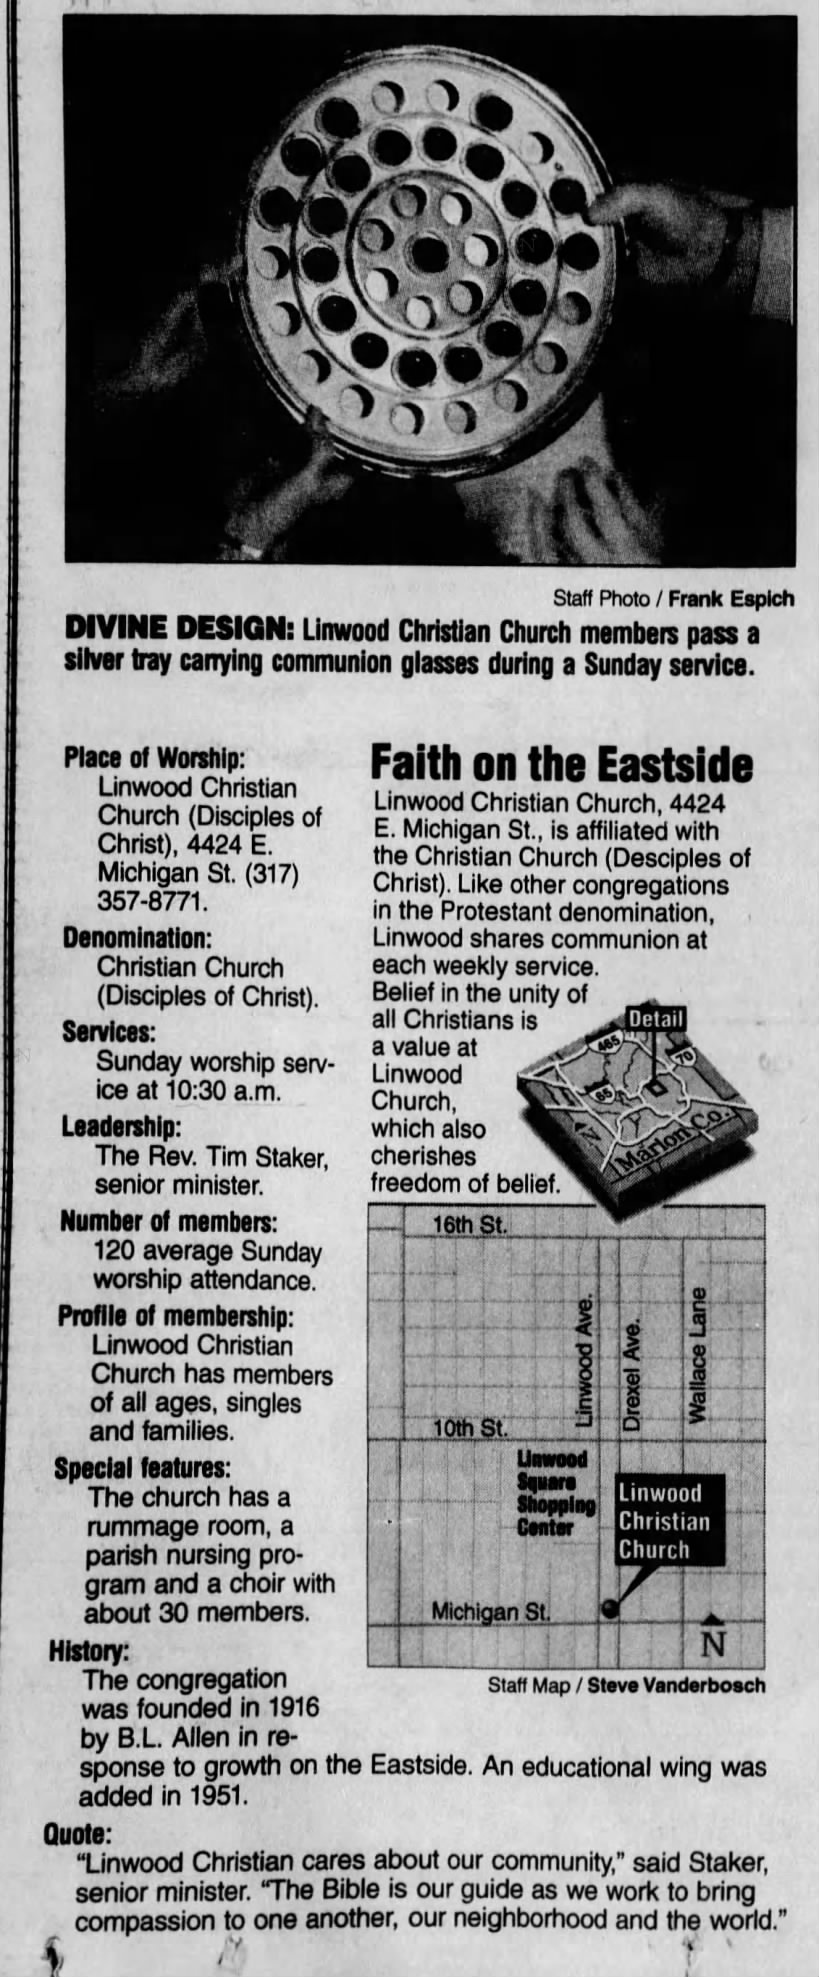 LinwoodChristianChurch_IndianapolisIN_pastor_TimStaker-26Jun1999